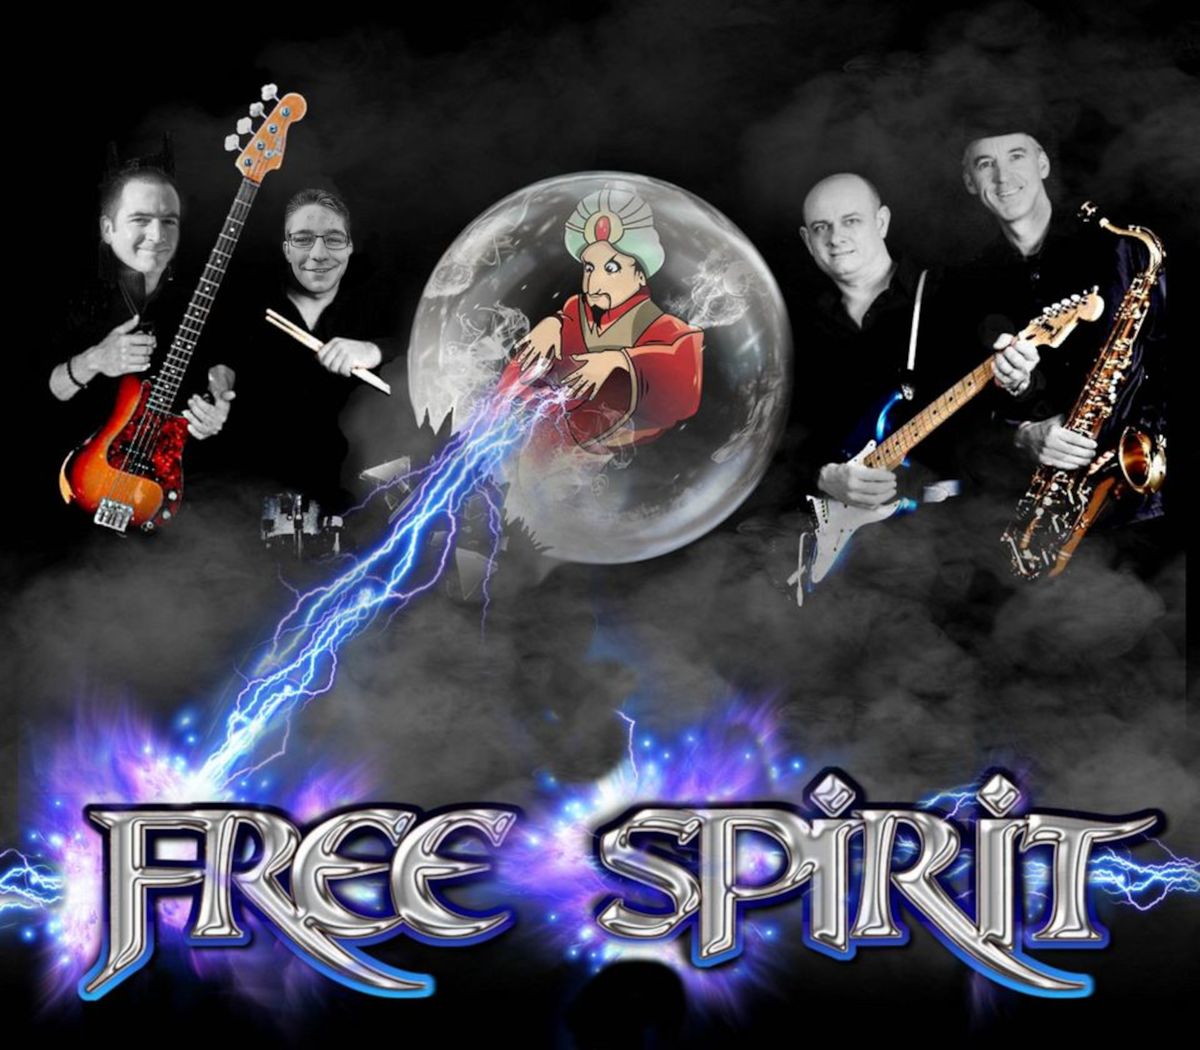 Free Spirit LIVE at The Queen Vic, Stroud